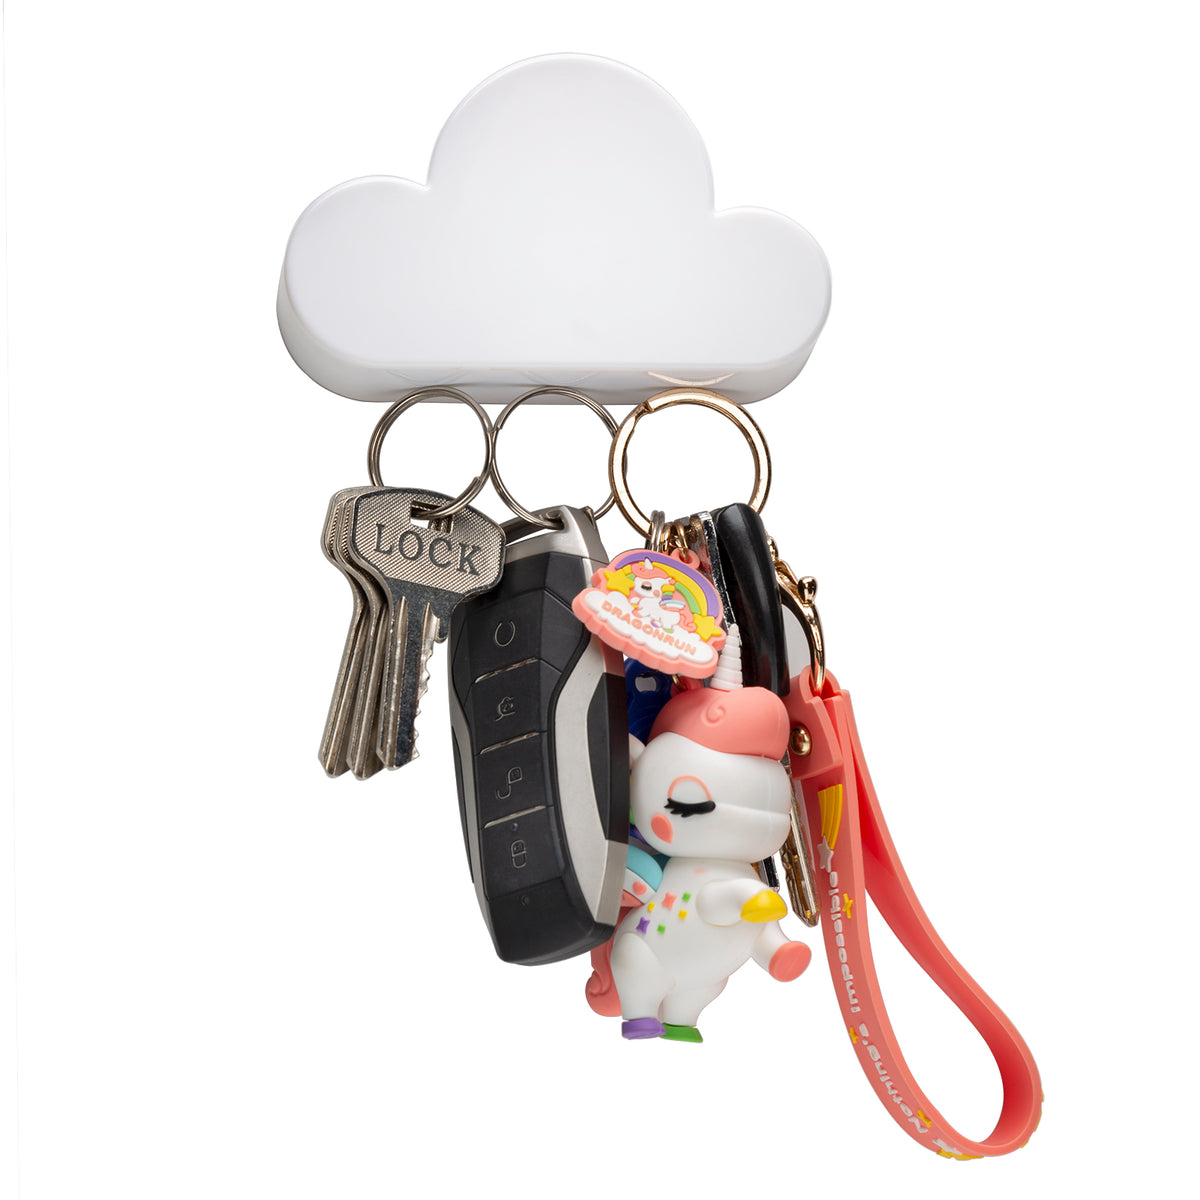 NOGIS 2 Pcs Cloud Key Holder Magnetic Key Rack Organizer Keychains Hooks  with Adhesive Magnetic Key Ring Holder, Ideal for Door, Entryway Decorative